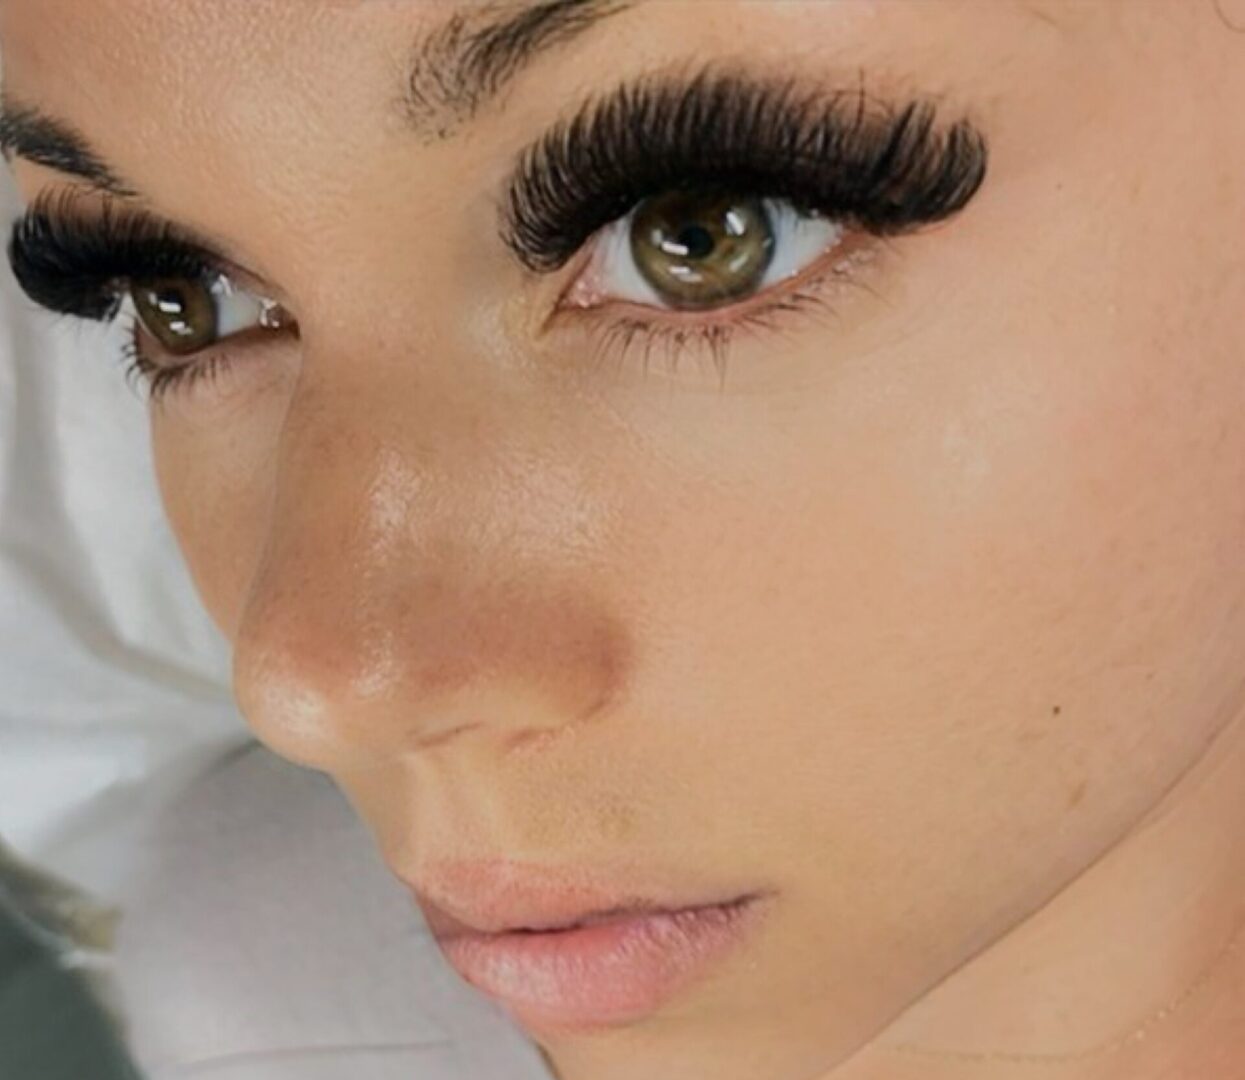 A woman with long eyelashes and green eyes.